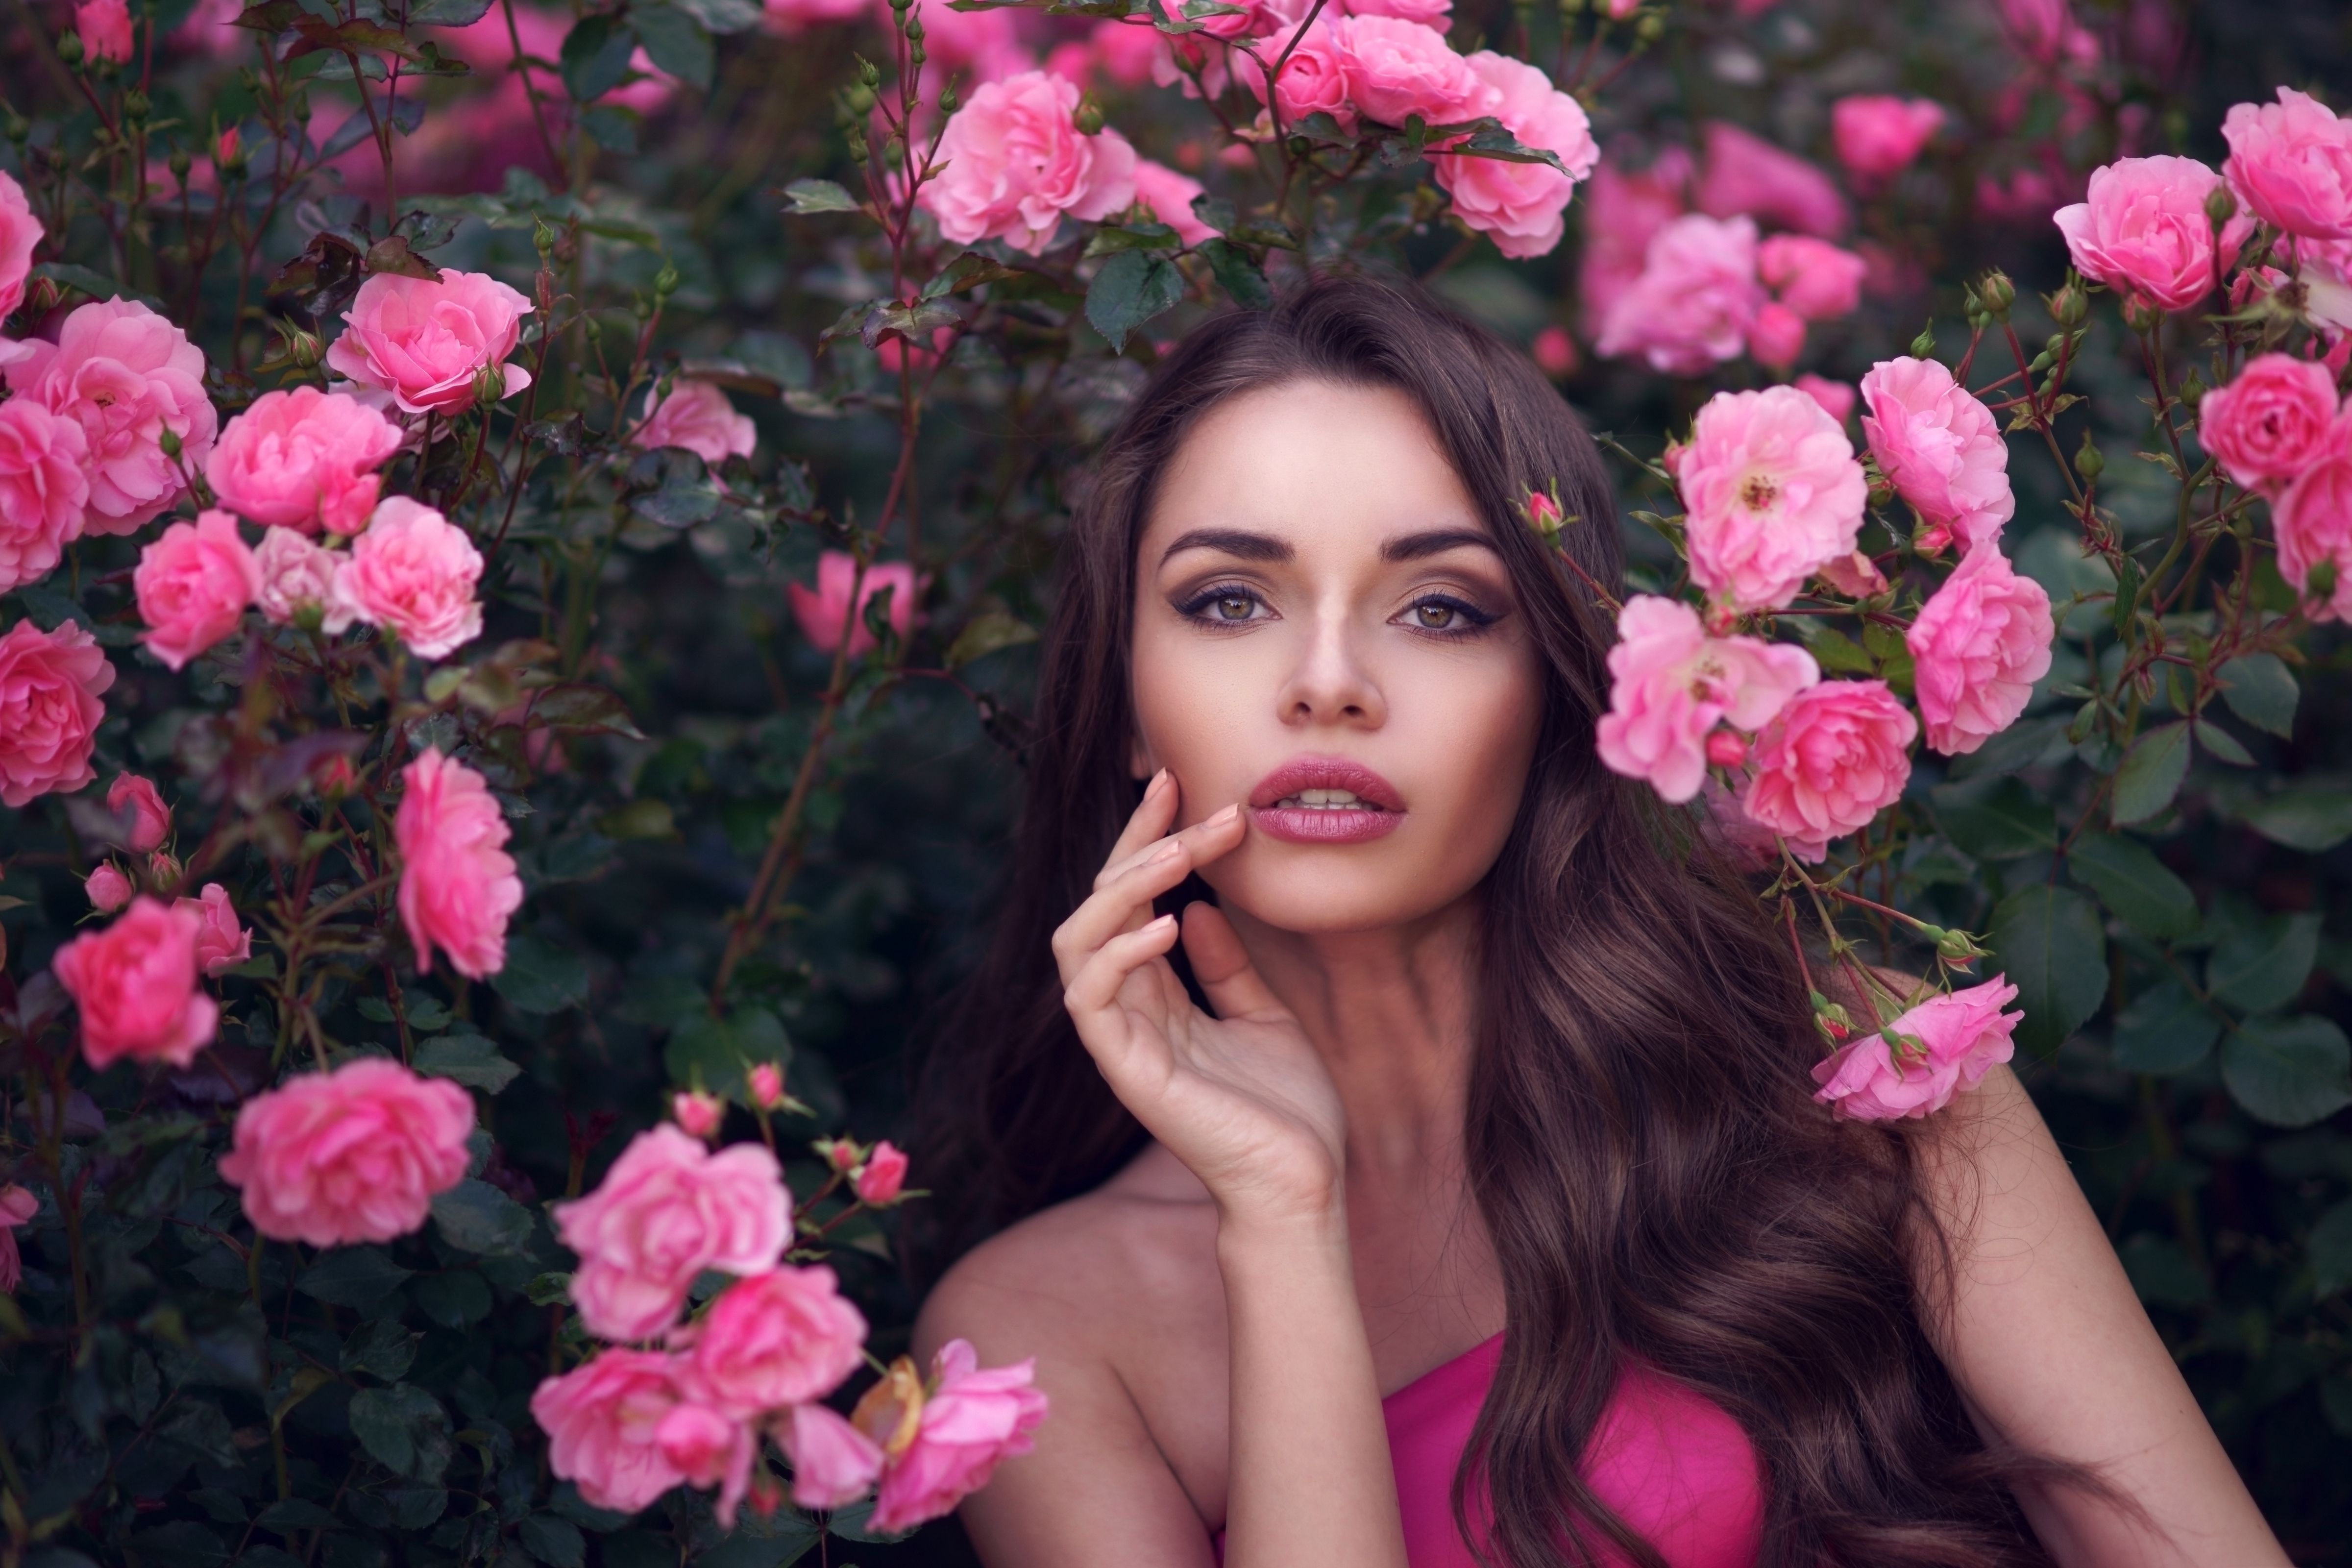 Woman in Pink Roses 4k Ultra HD Wallpaper. Background Image